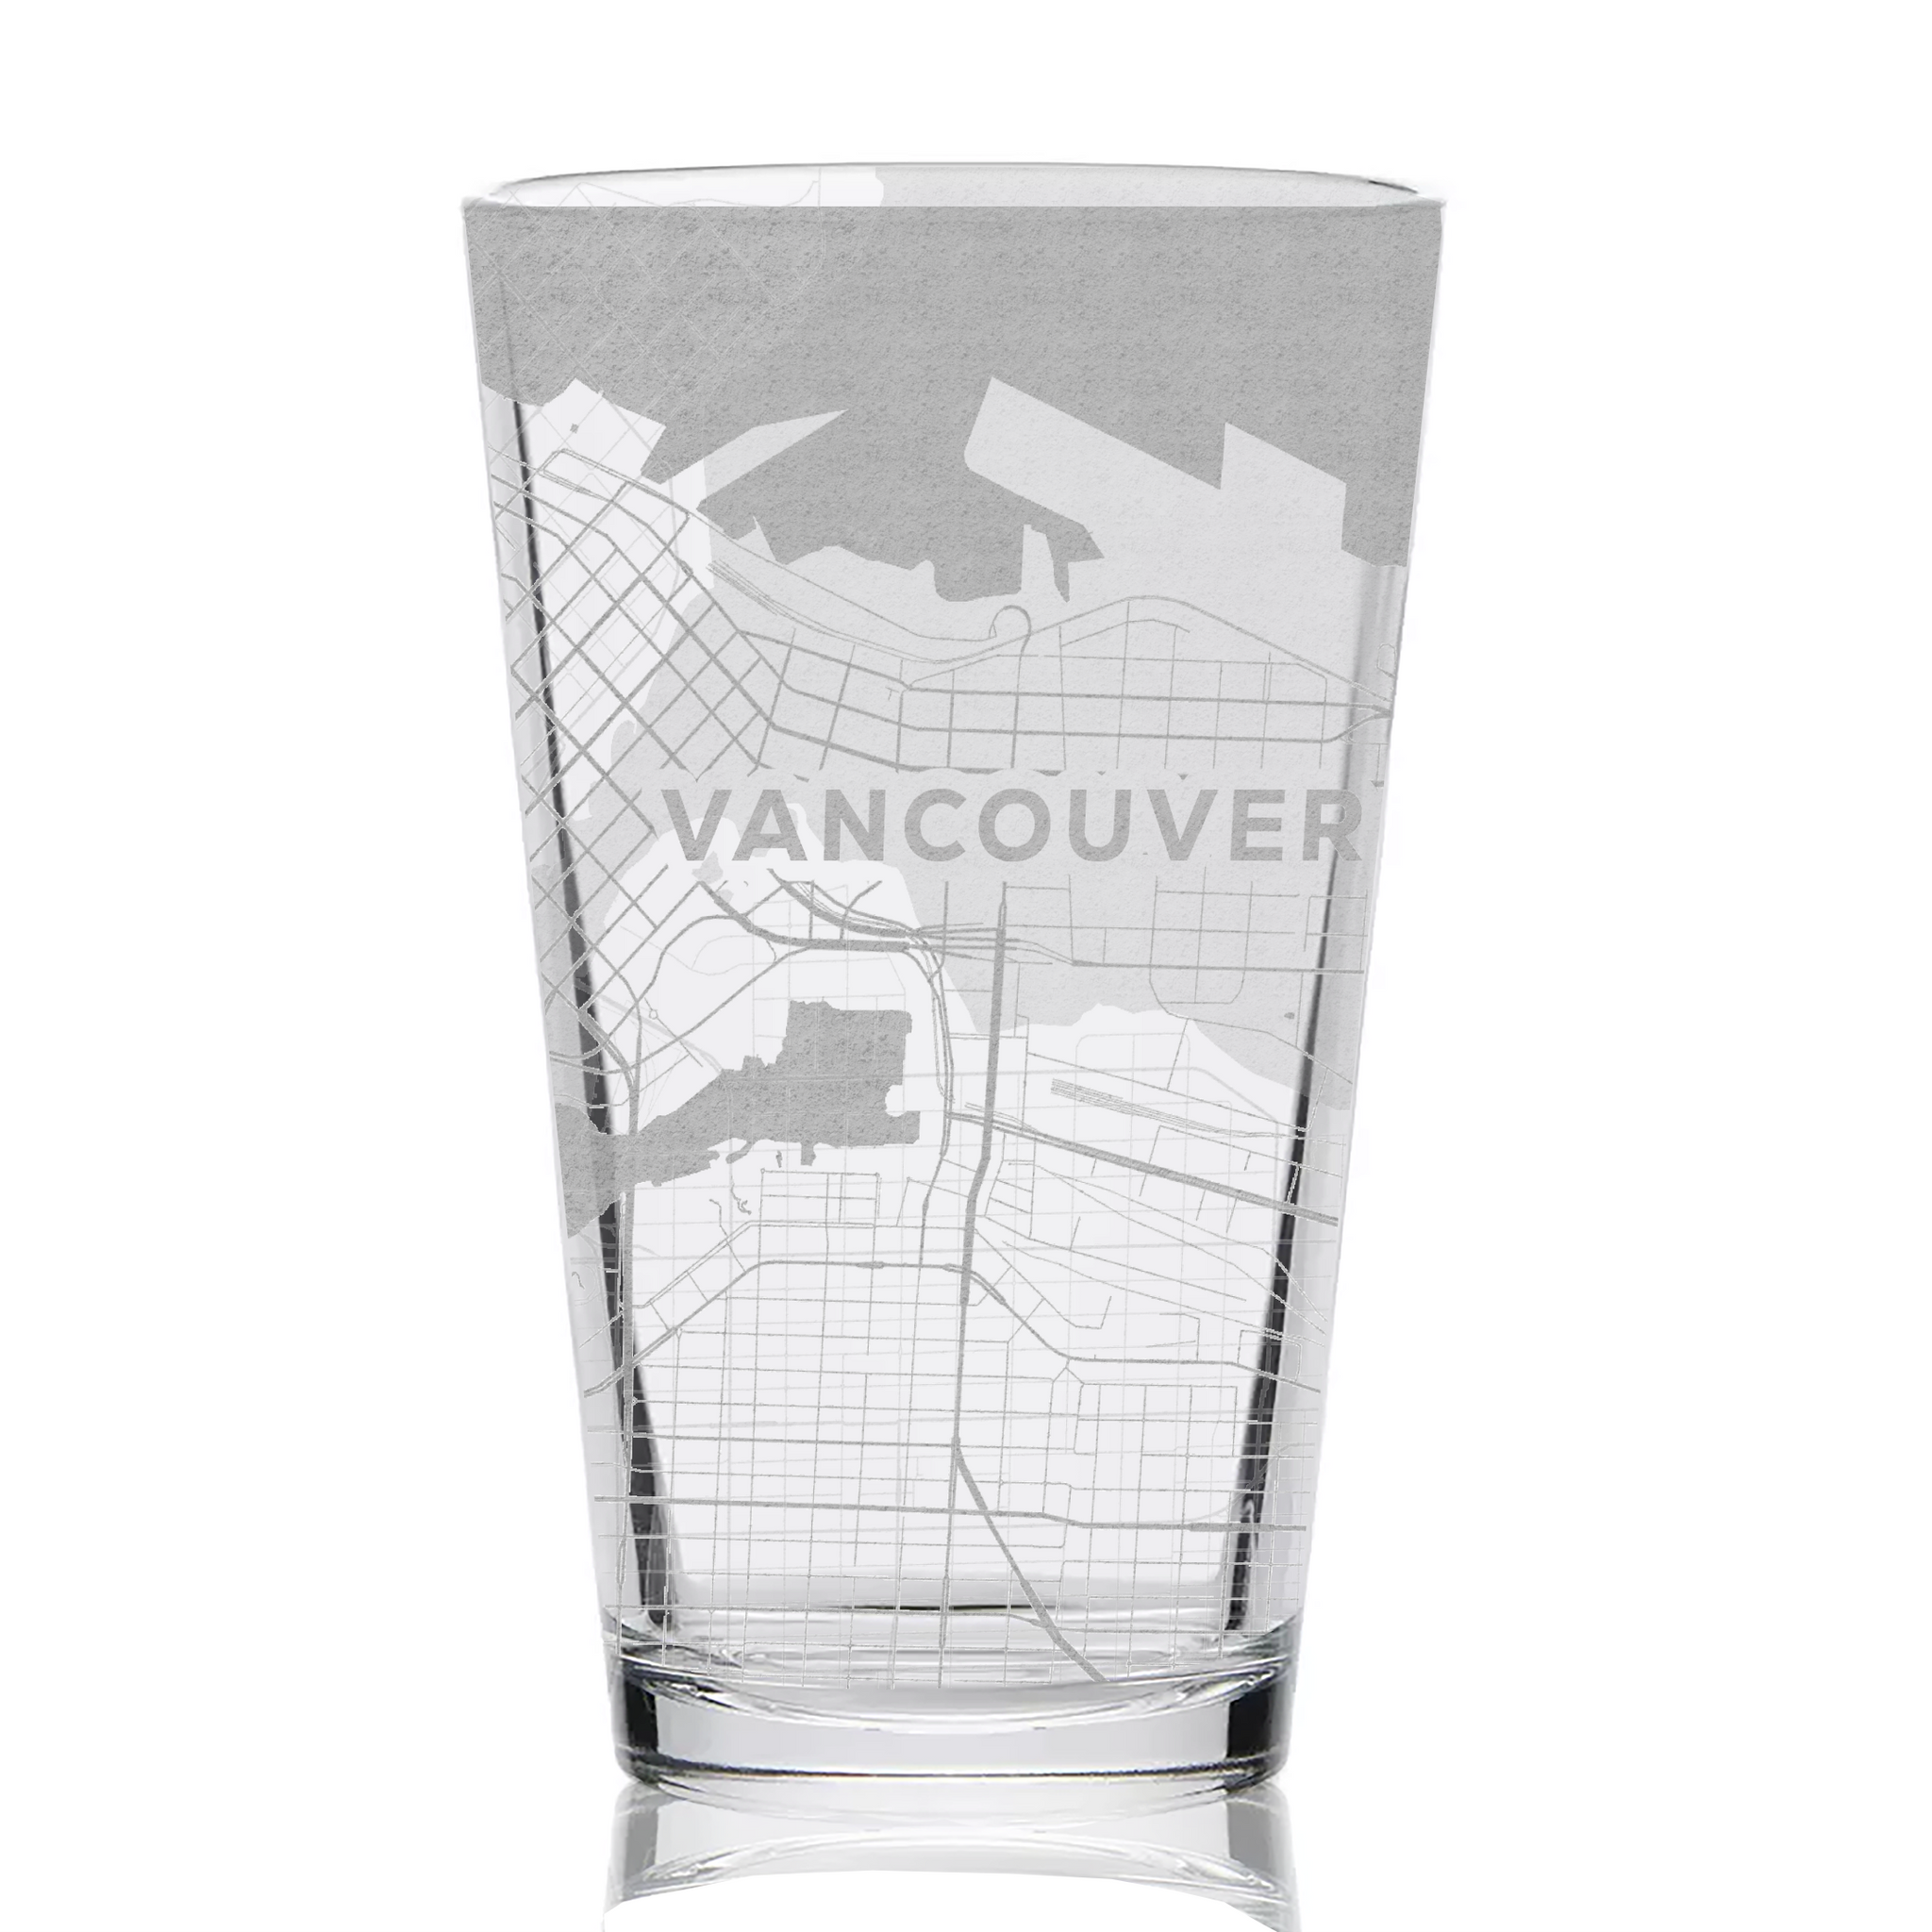 VANCOUVER, BC Pint Glass